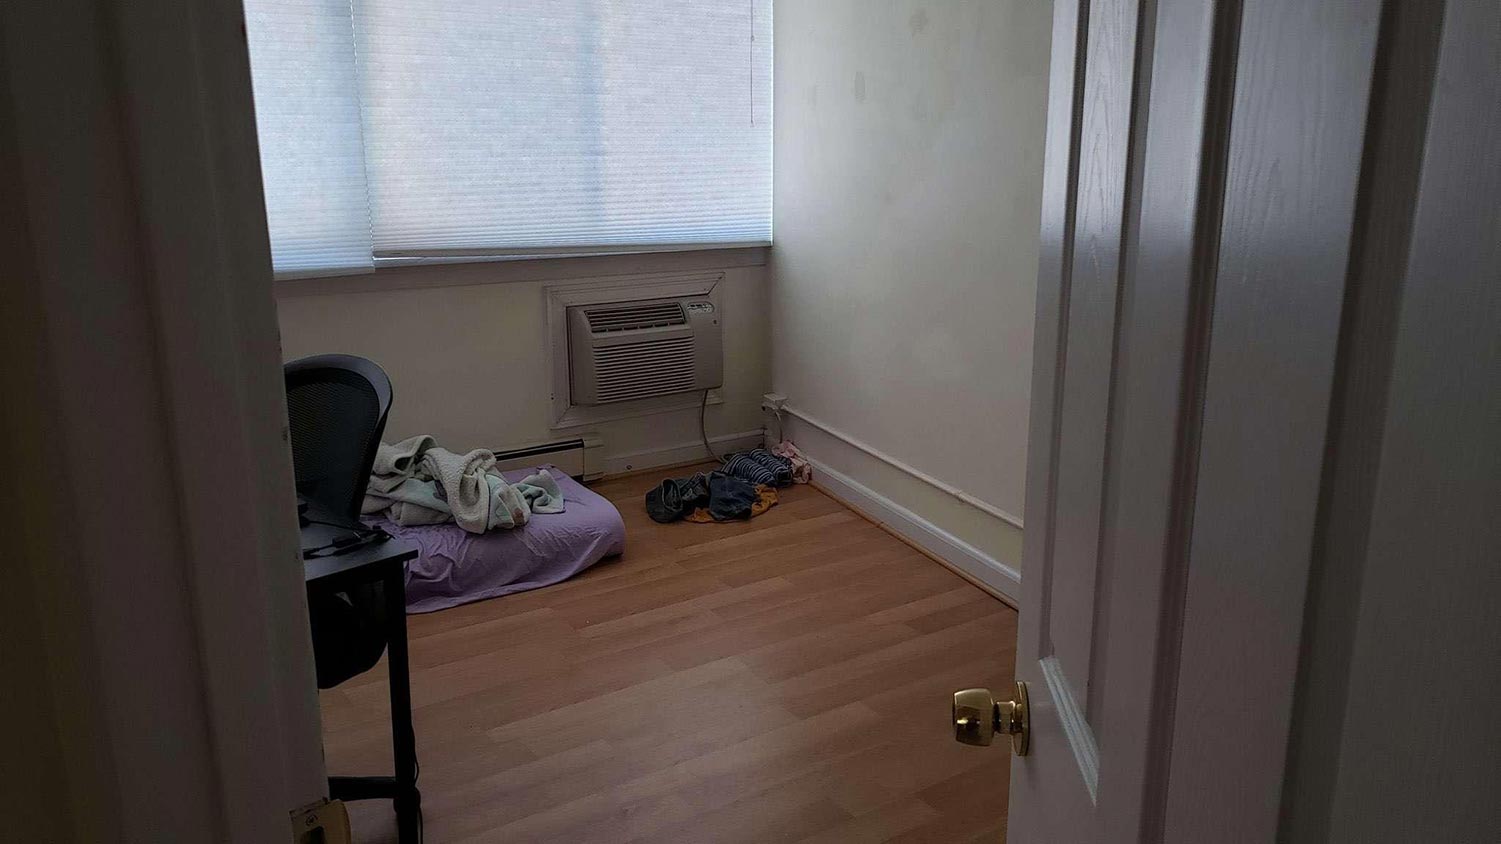 A door to a bedroom opens, only showing a chair and the foam mattress topper folded in half on the floor.